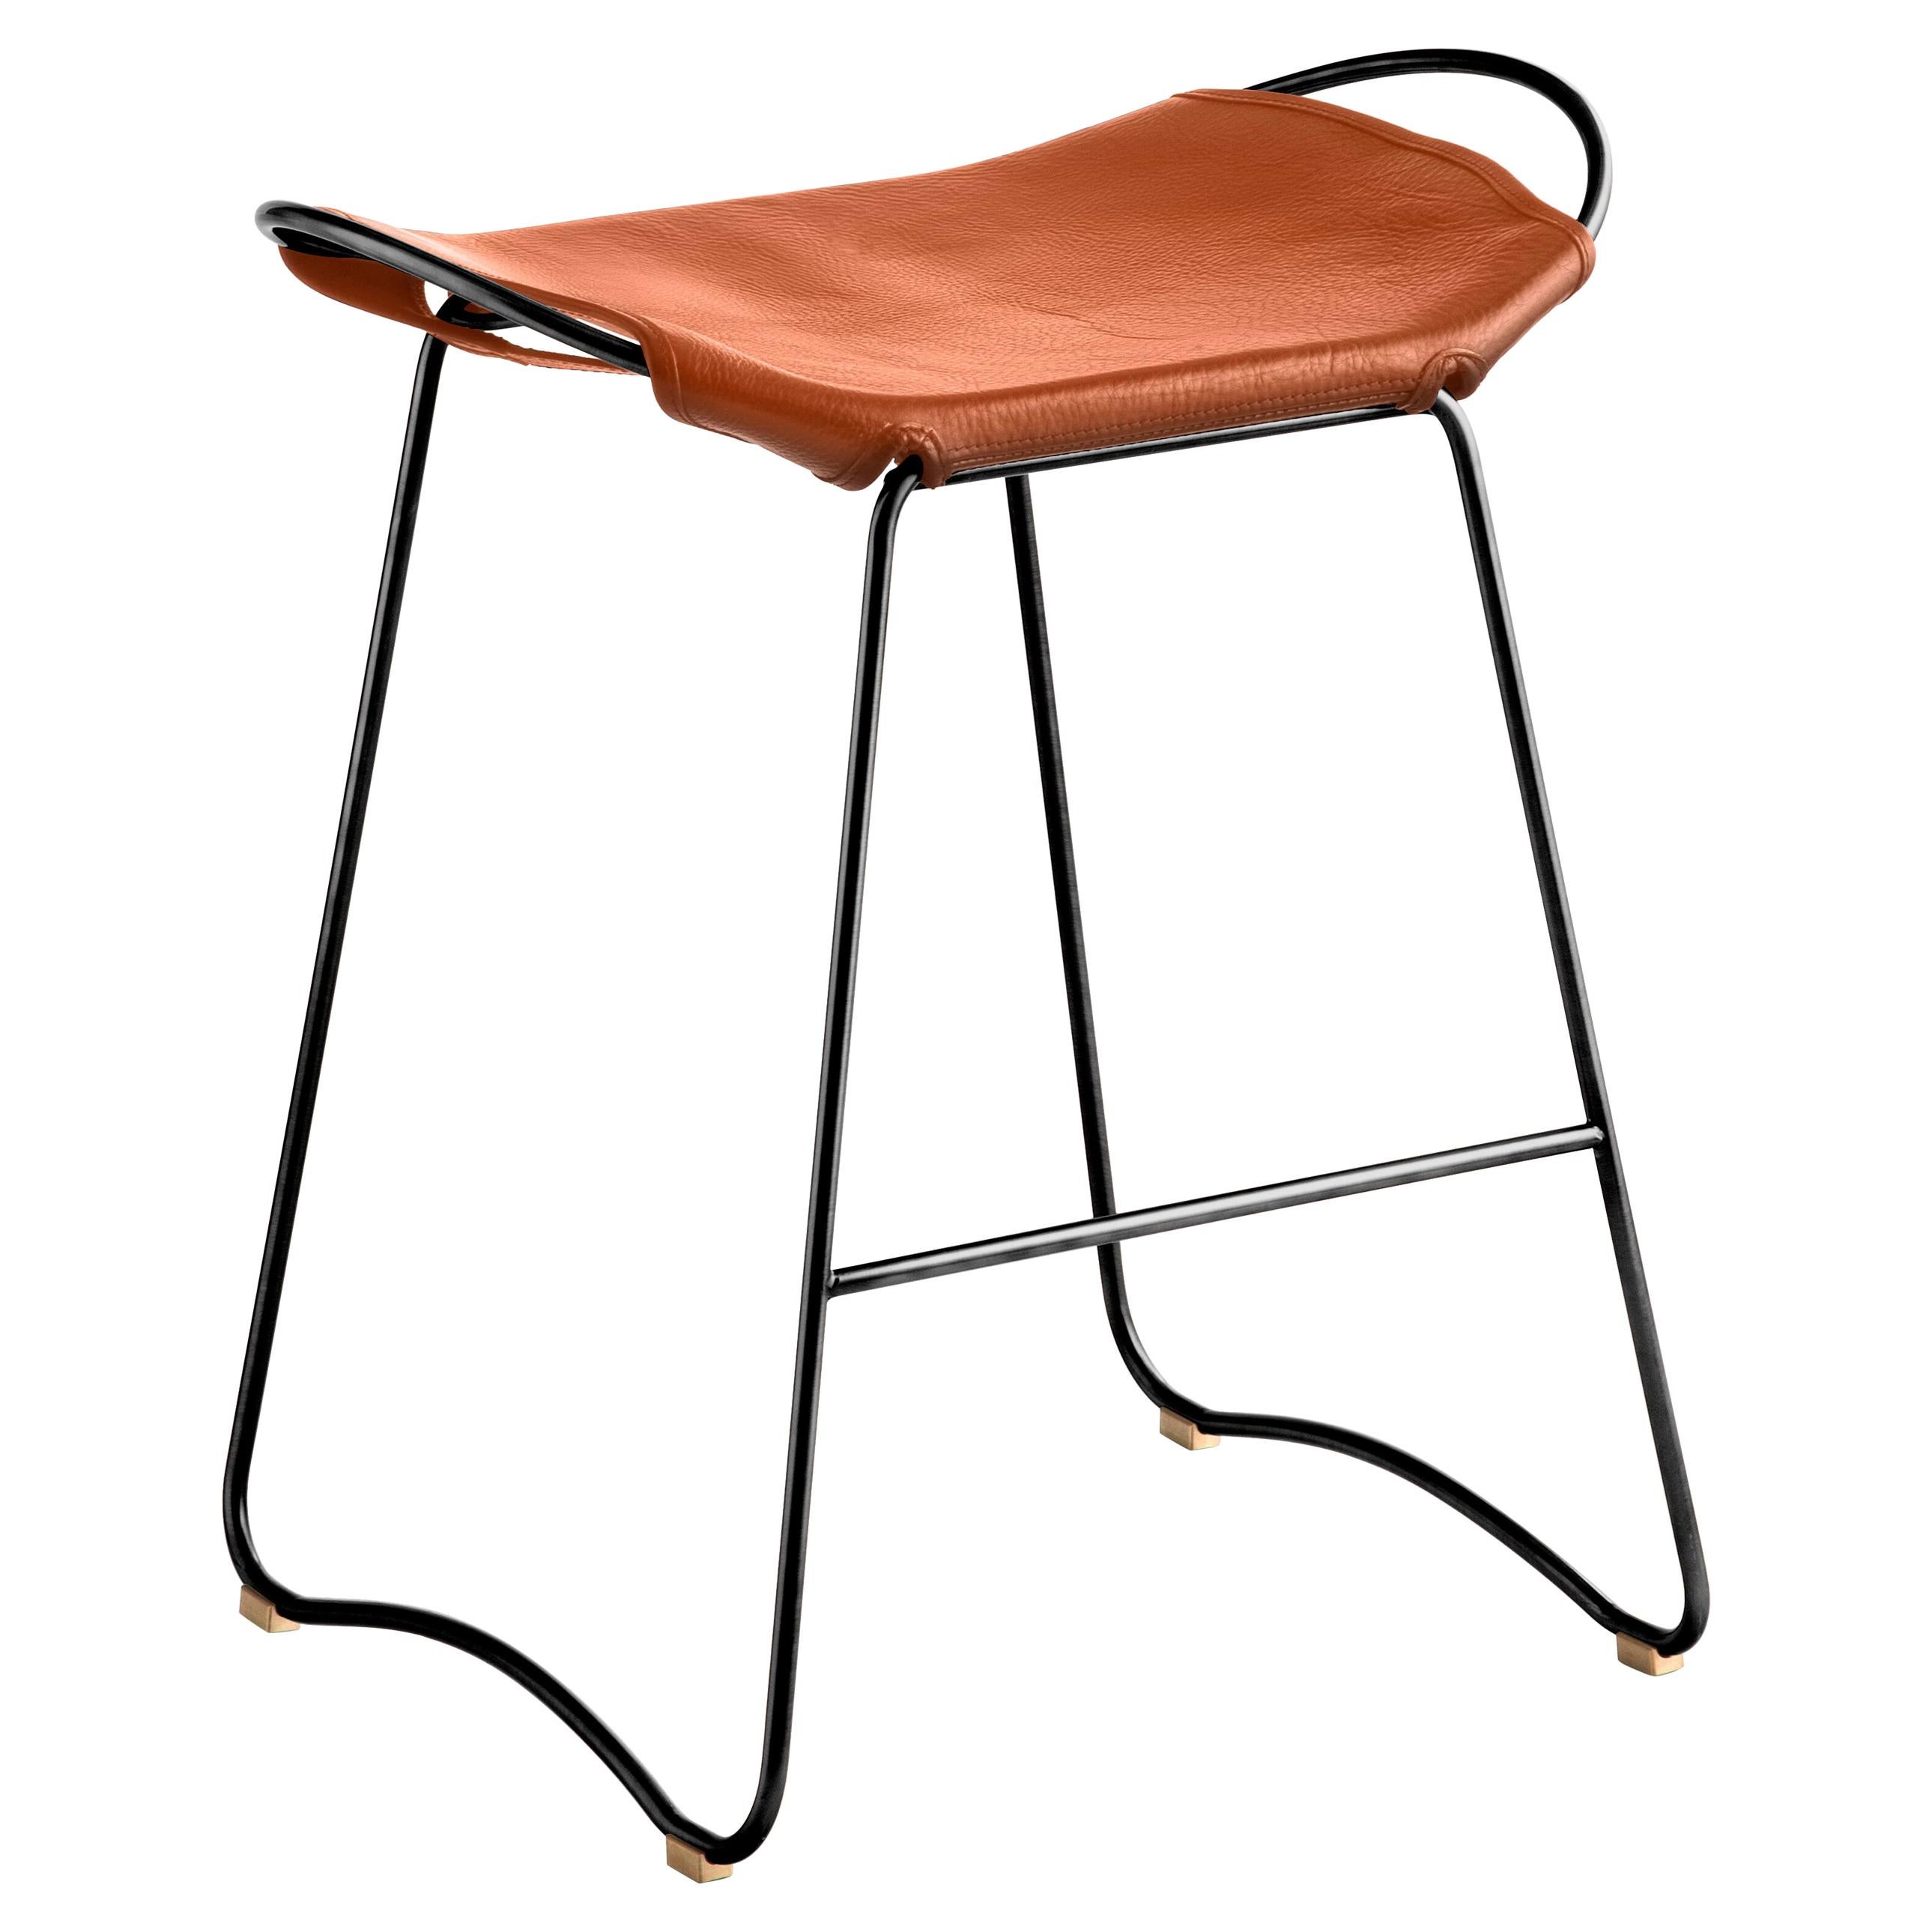 Kitchen Counter Stool Black Steel & Natural Tobacco Leather, Contemporary Style